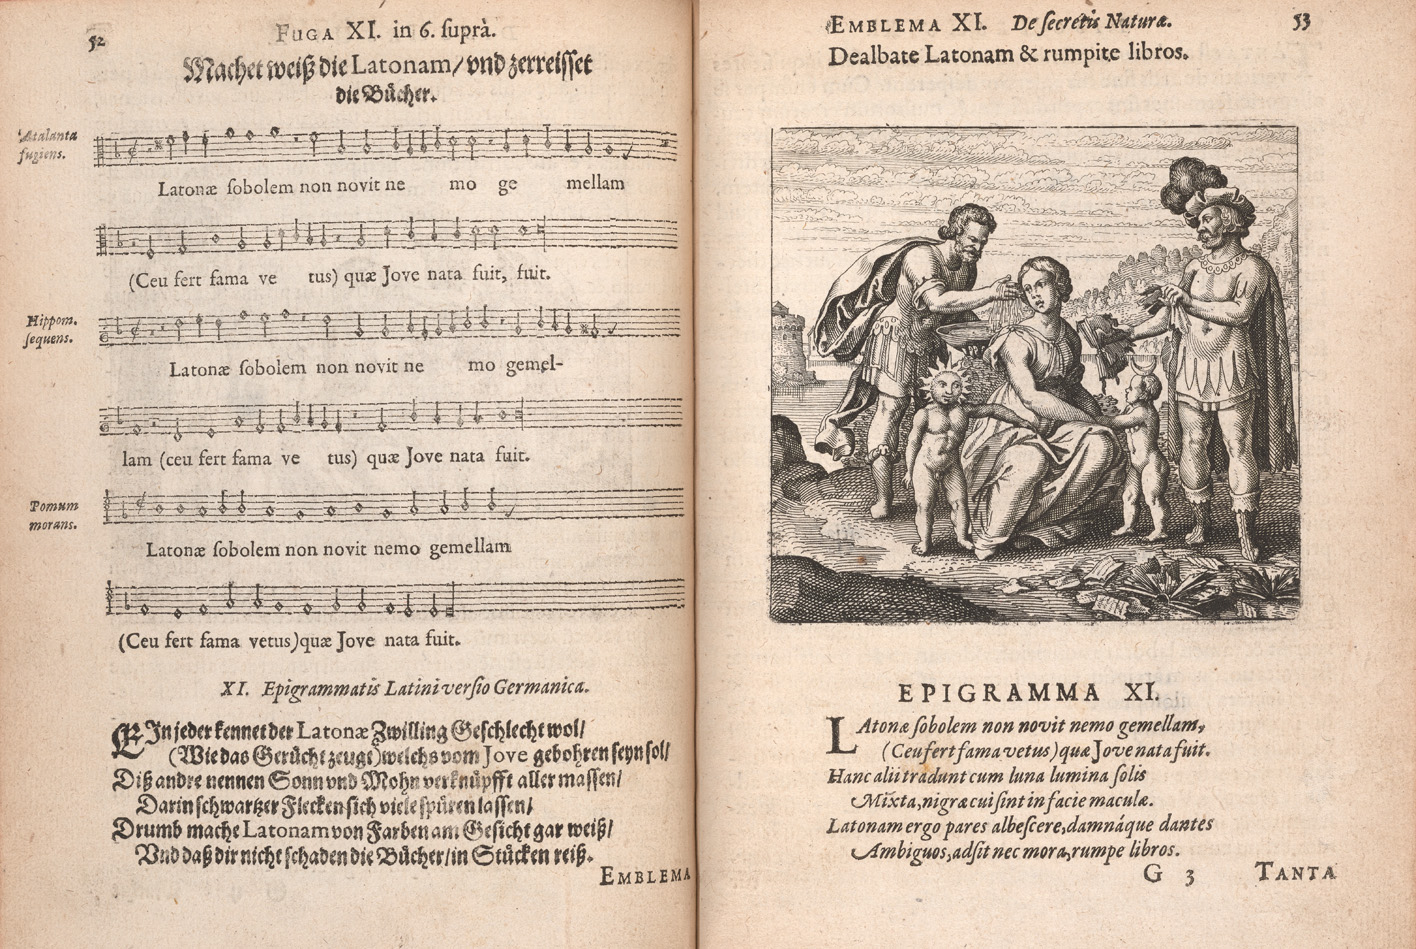 A two page spread of the first and second pages of emblem 11 from Atalanta fugiens, which show a motto and epigram in German along with a fugue, and a motto and epigram in Latin along with an image, respectively.